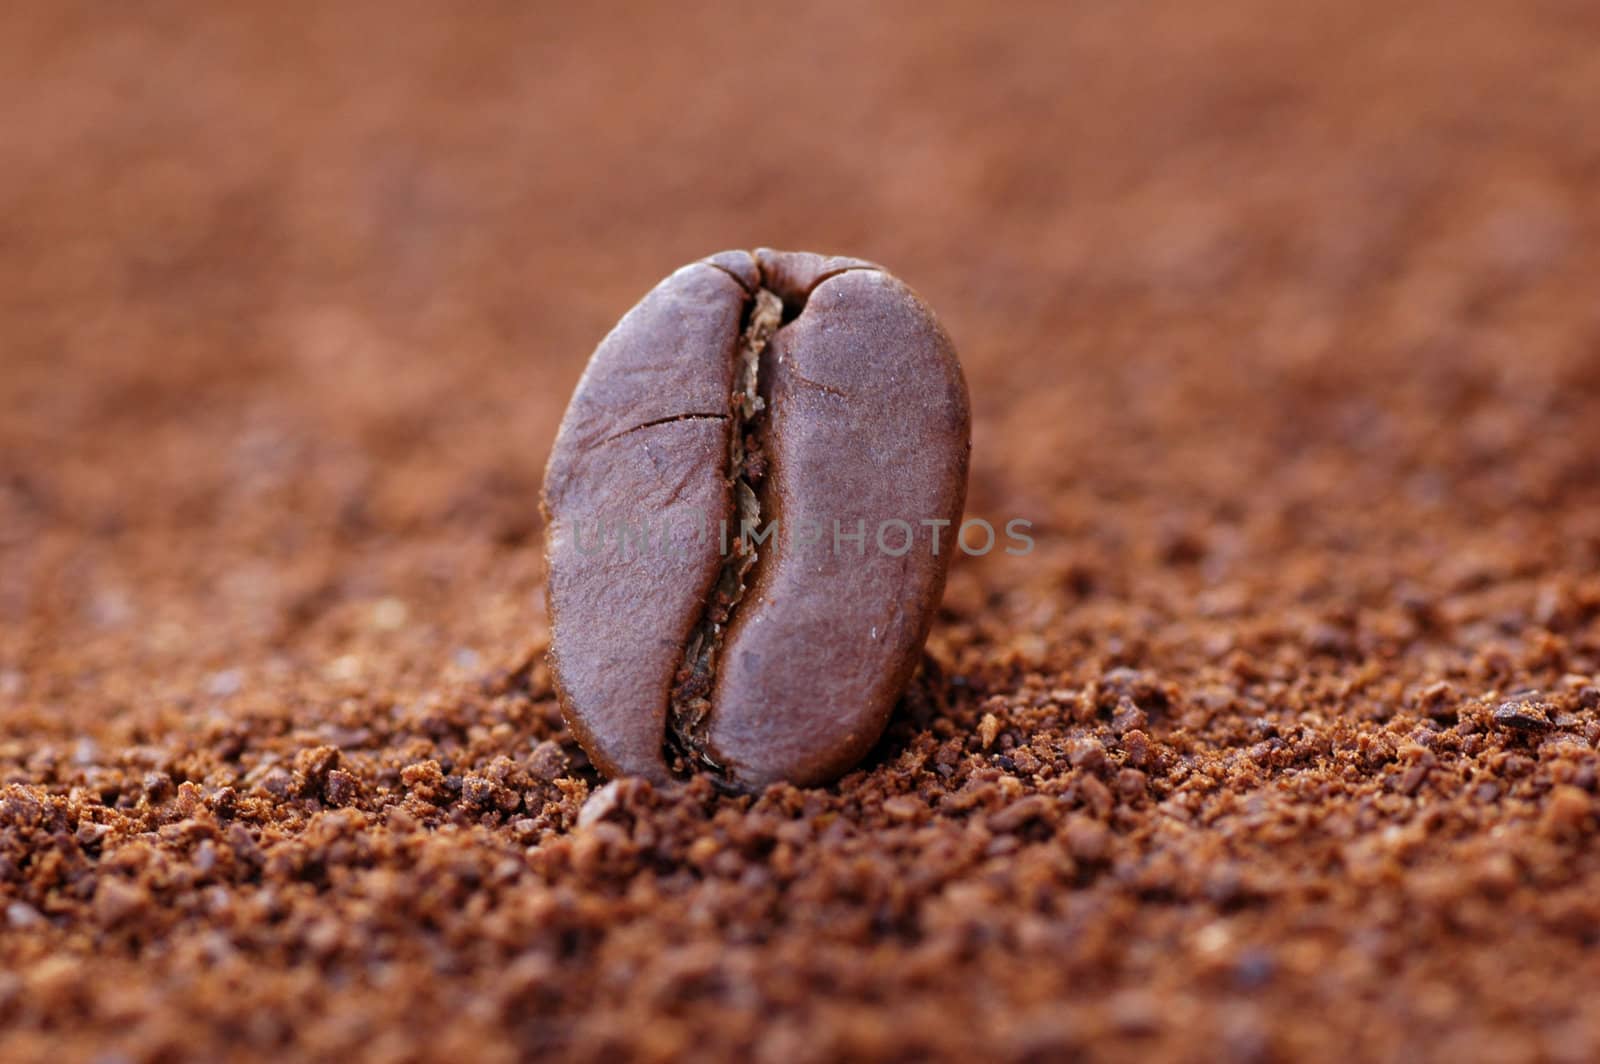 One Coffee bean in the centre